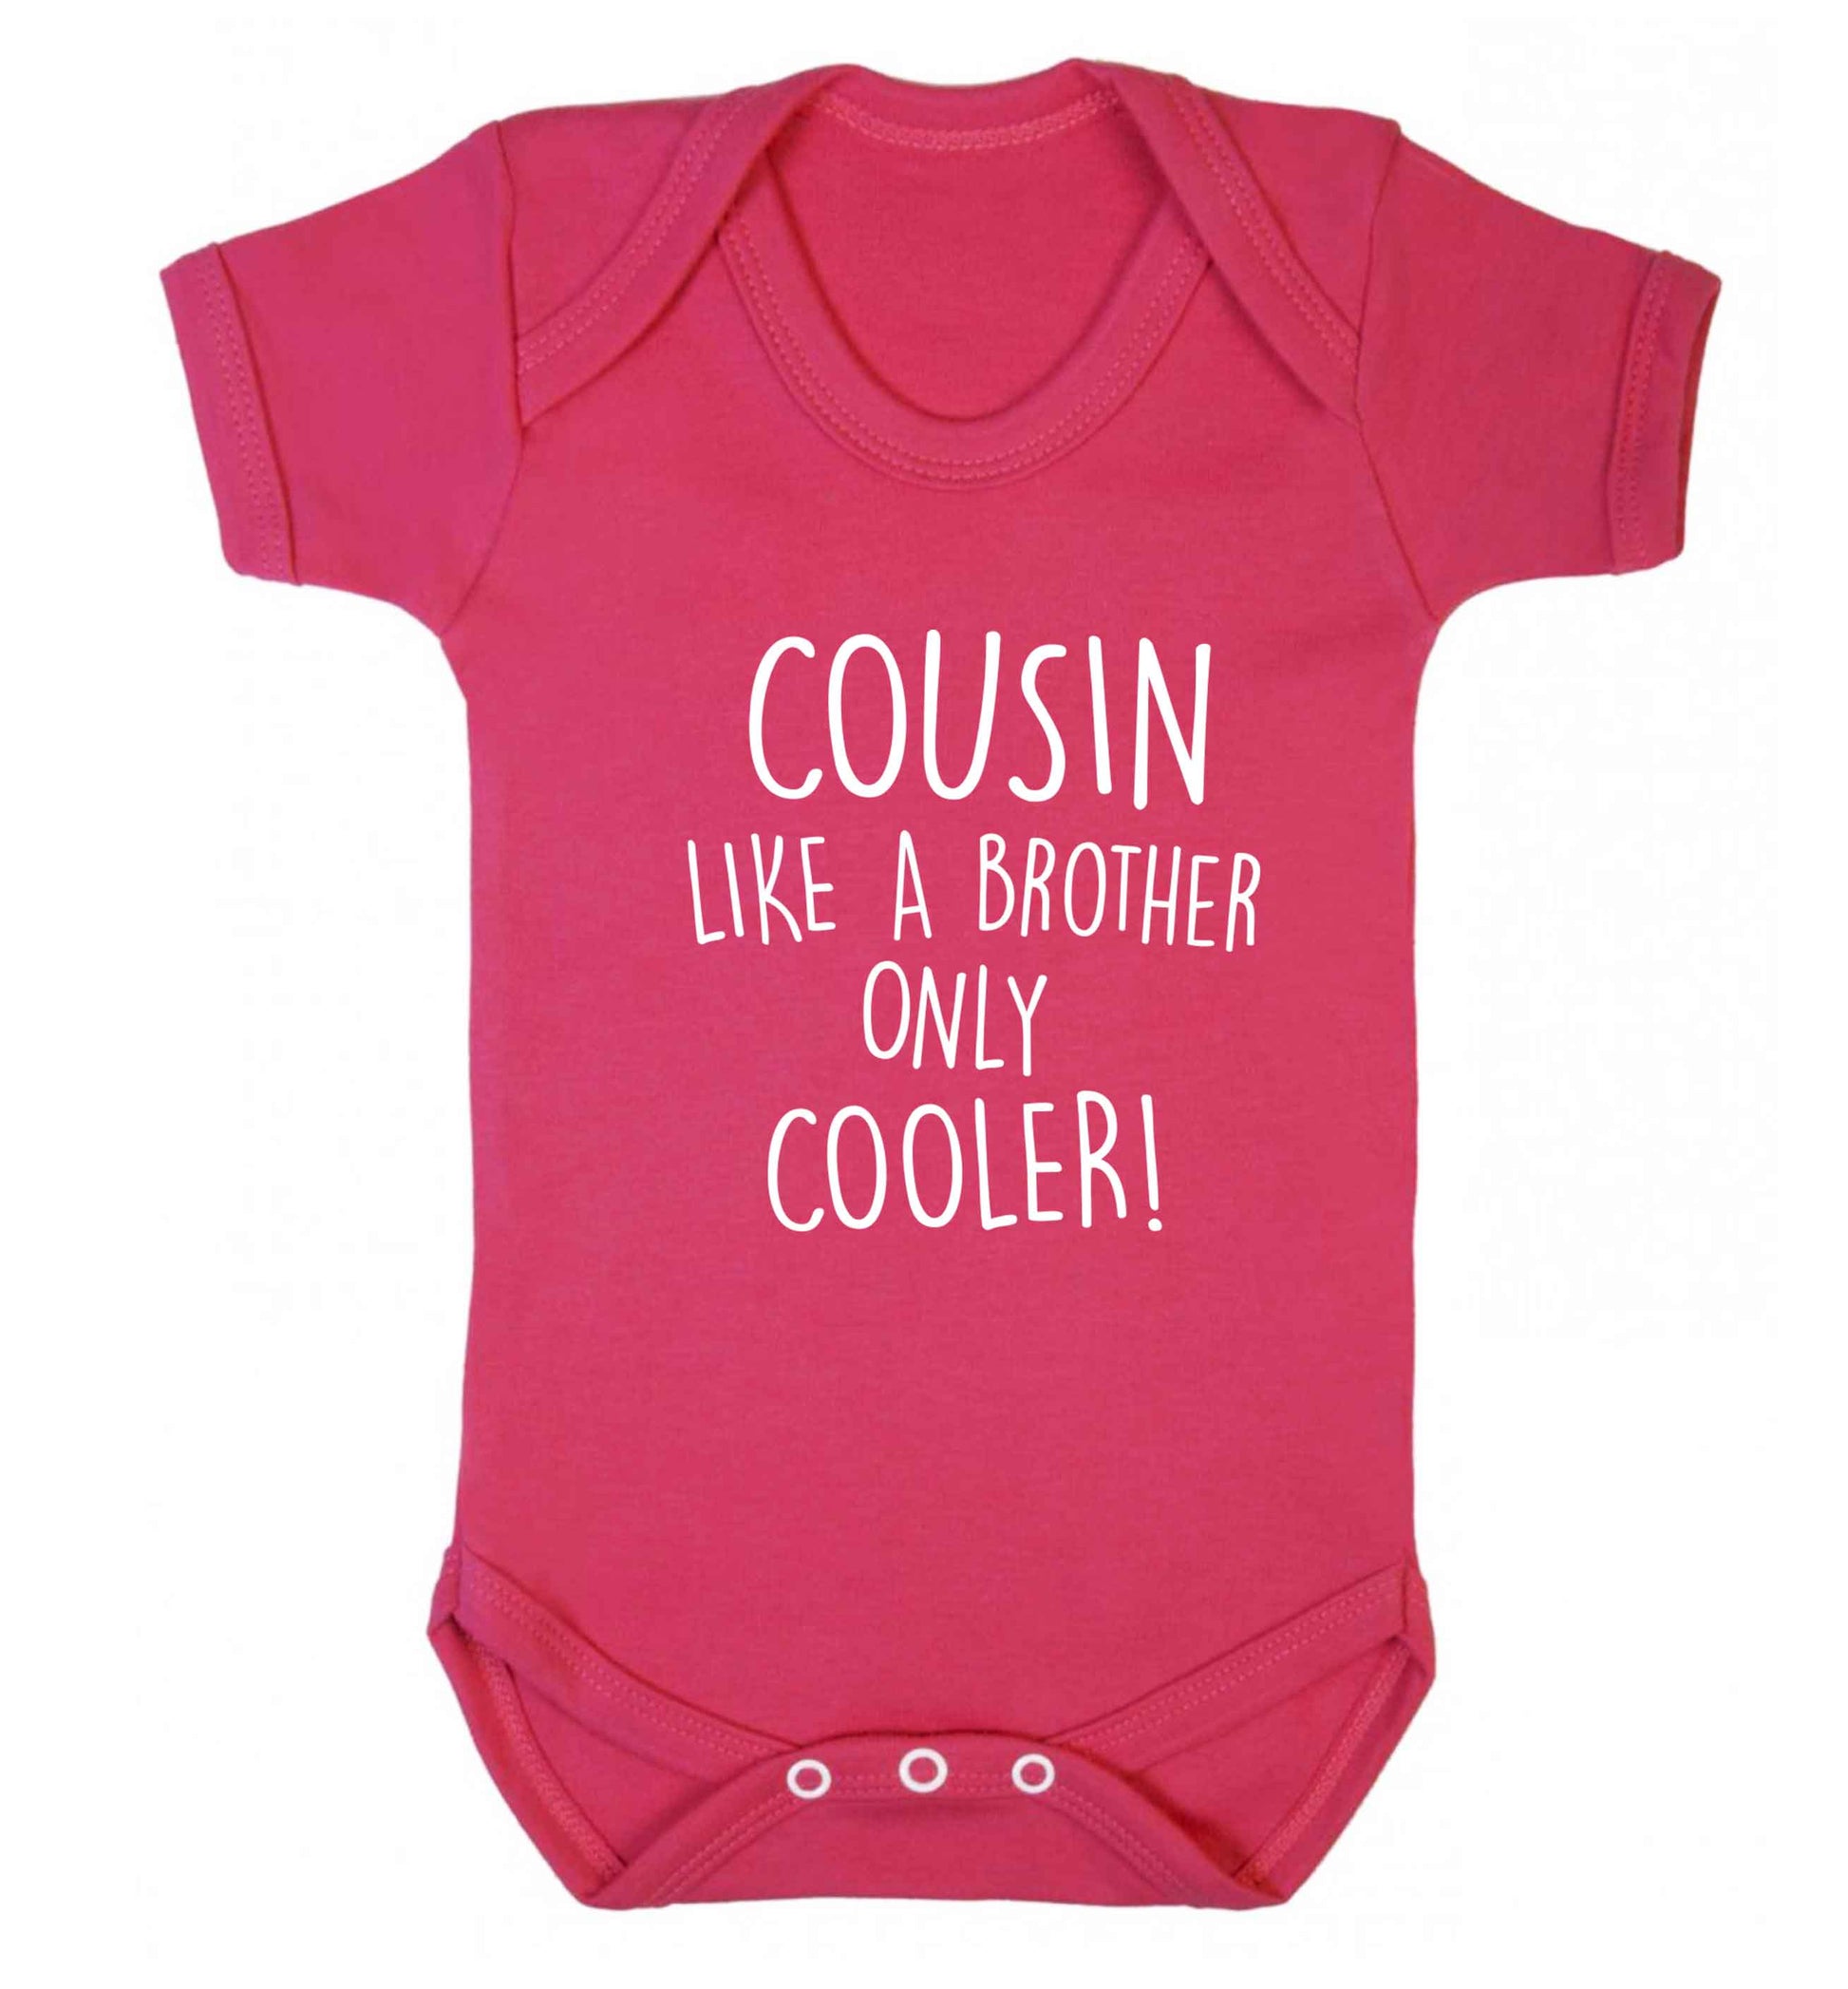 Cousin like a brother only cooler baby vest dark pink 18-24 months